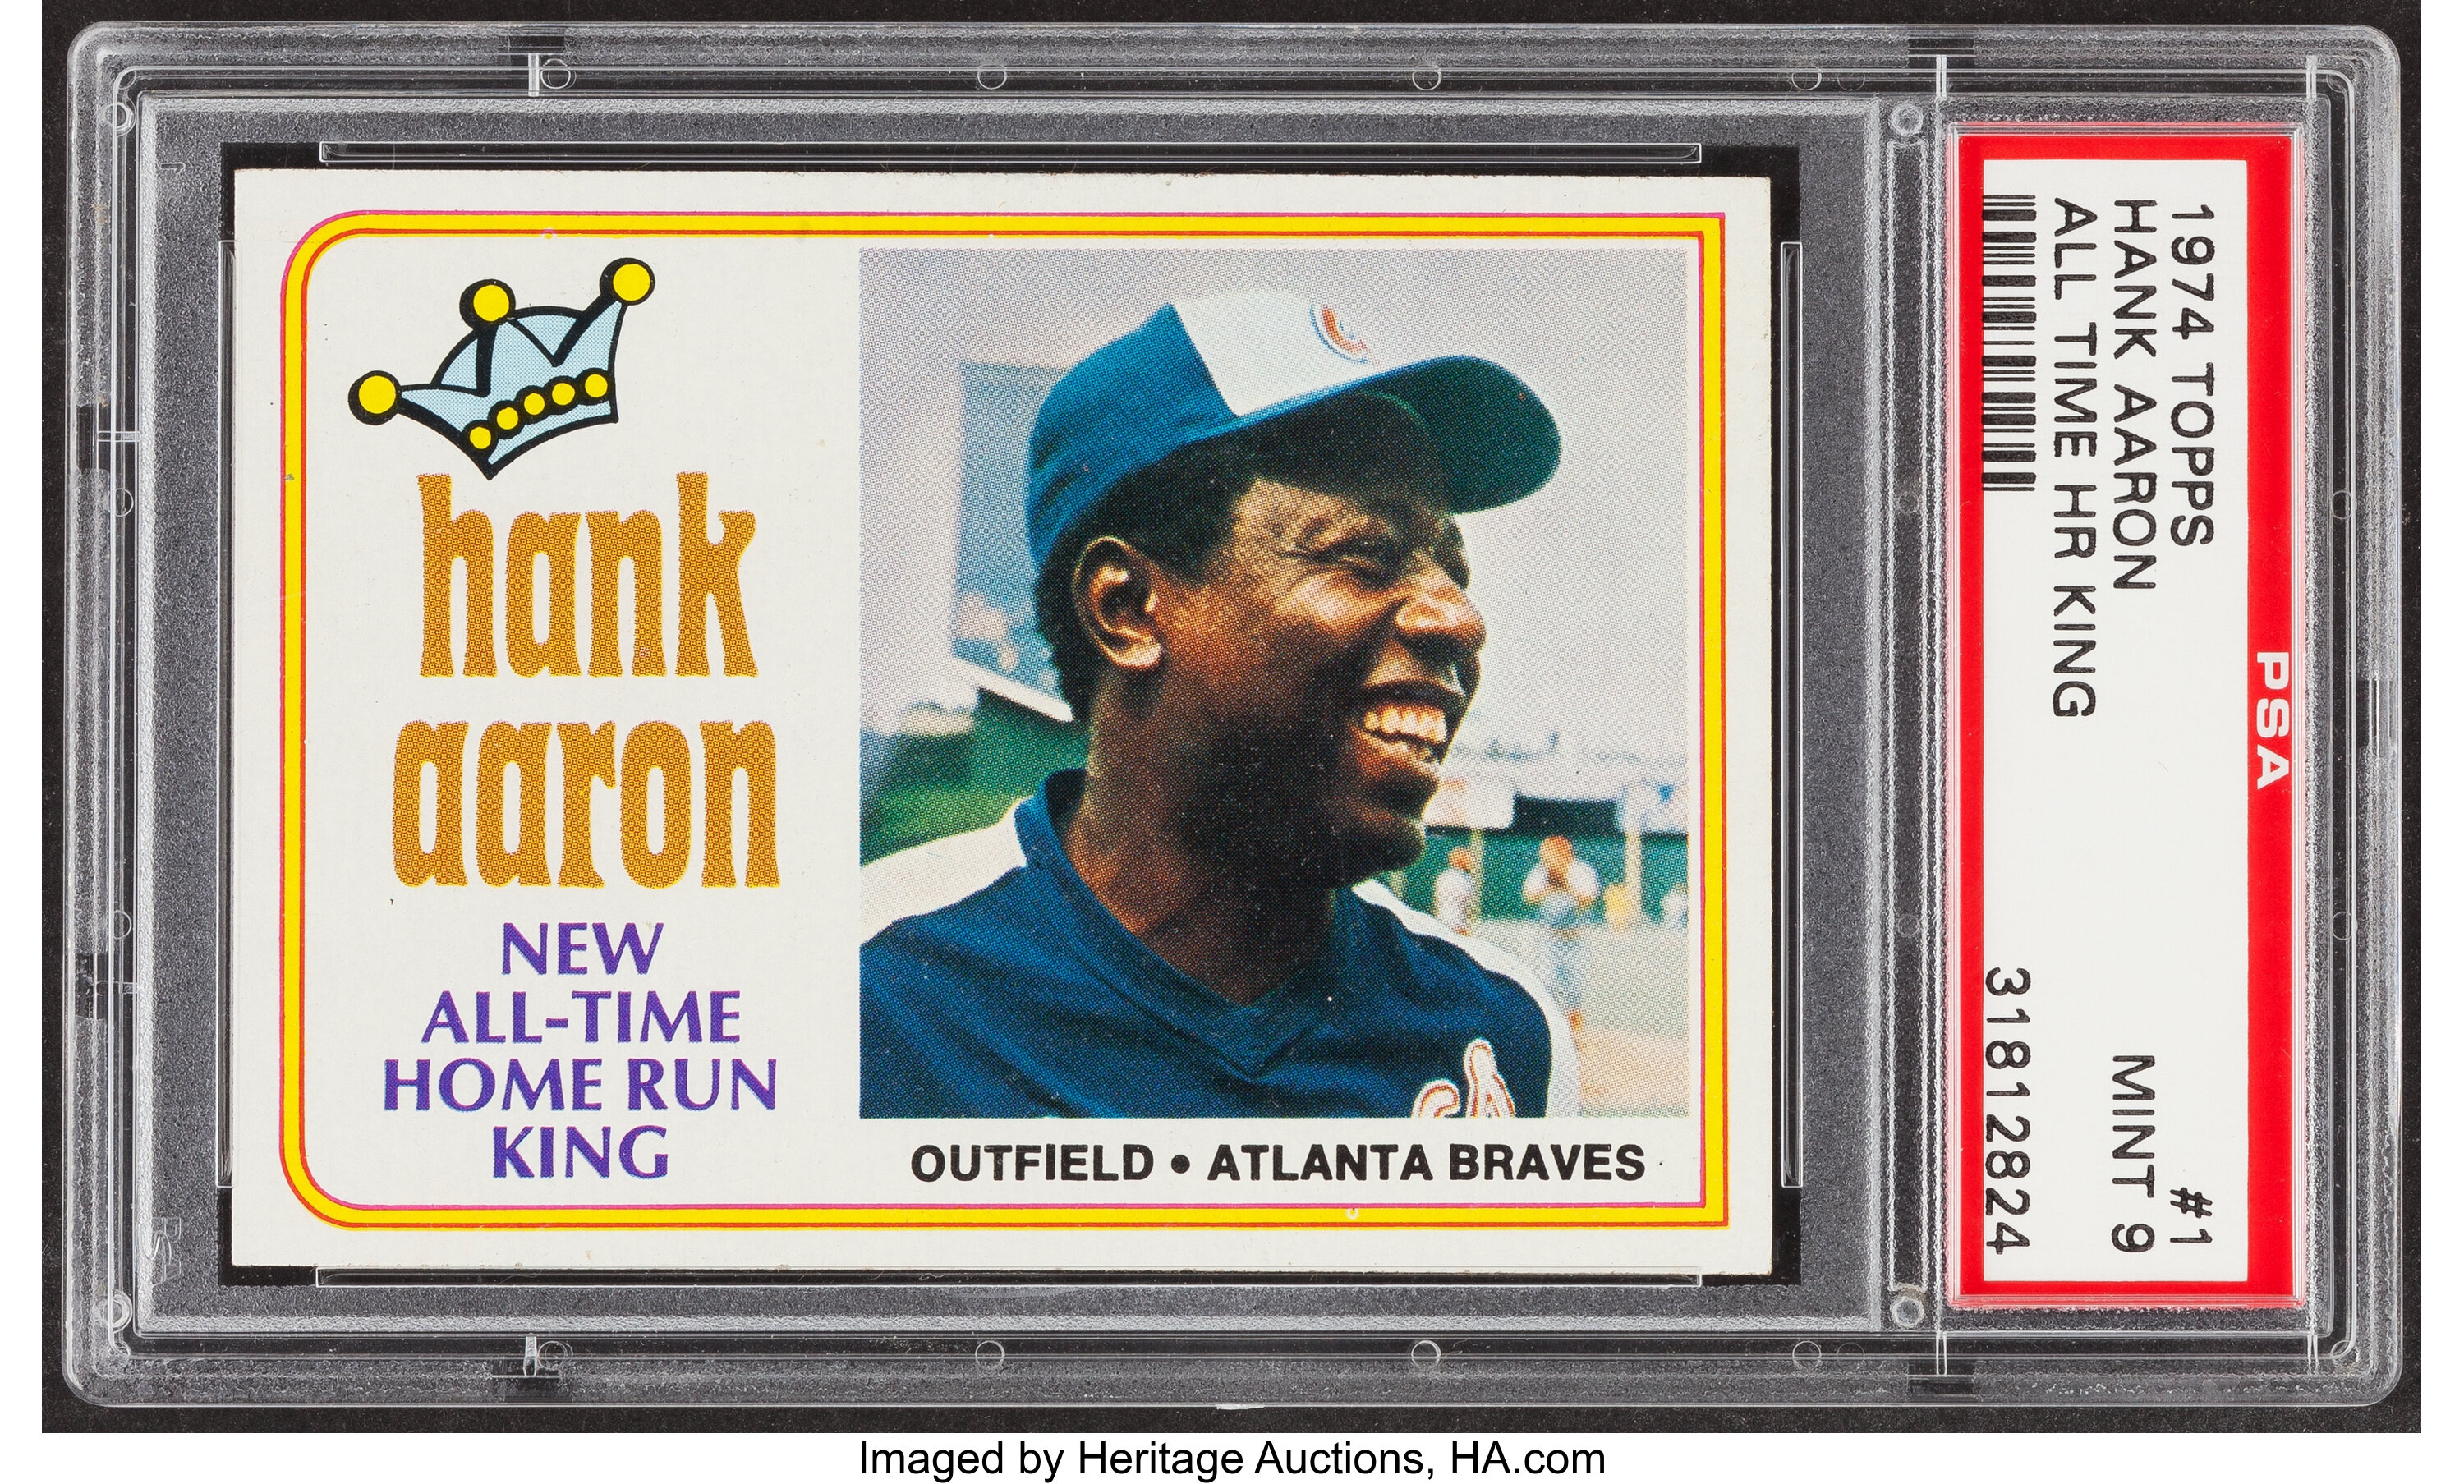 Sold at Auction: One Topps # 1 Hank Aaron baseball card